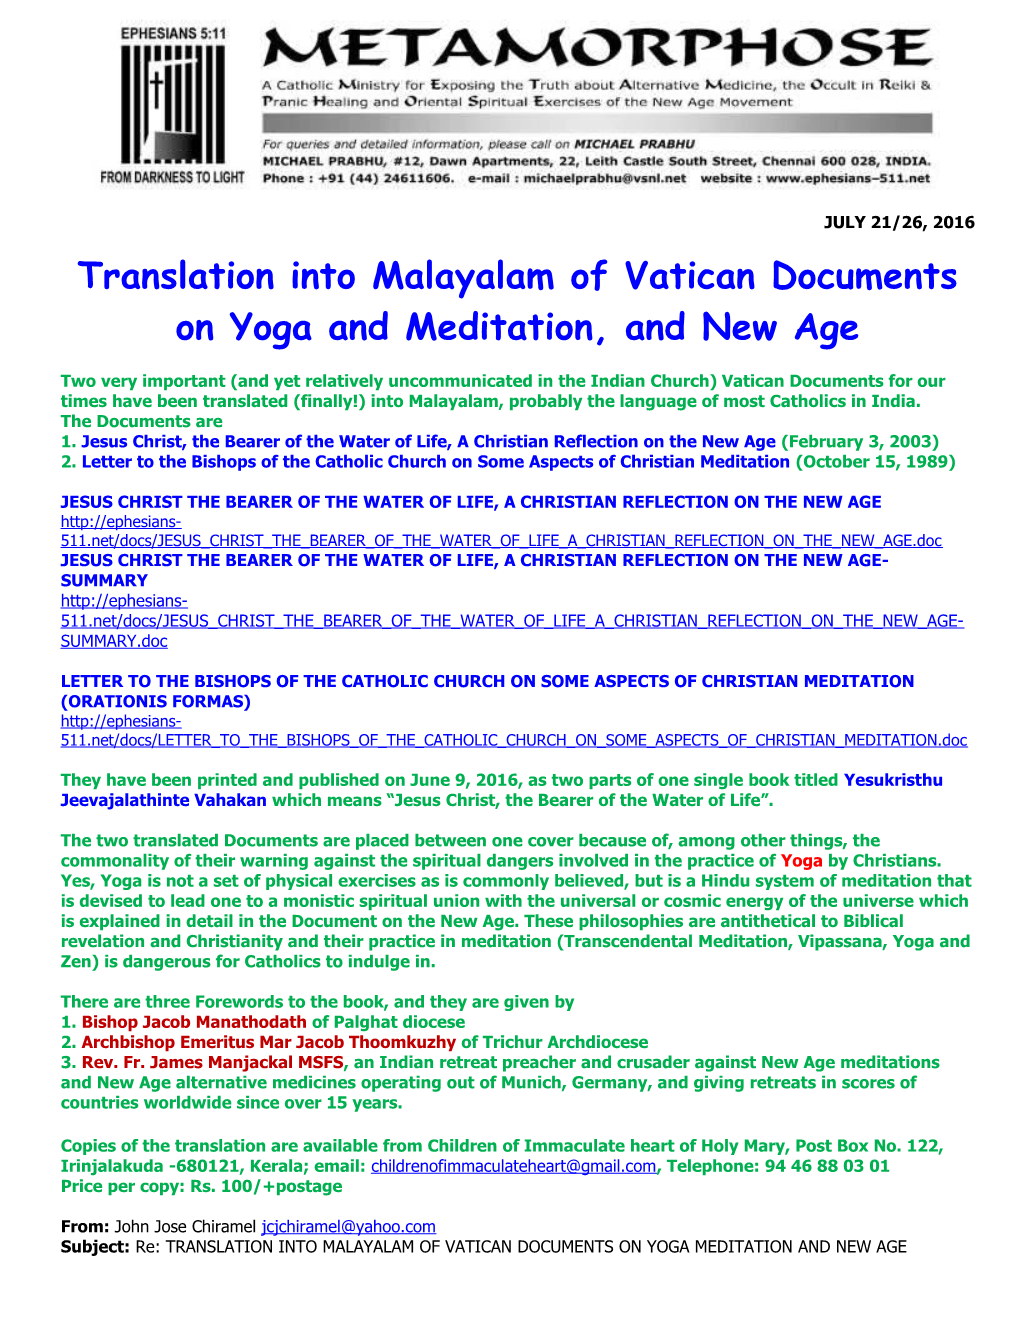 Translation Into Malayalam of Vatican Documents on Yoga and Meditation, and New Age